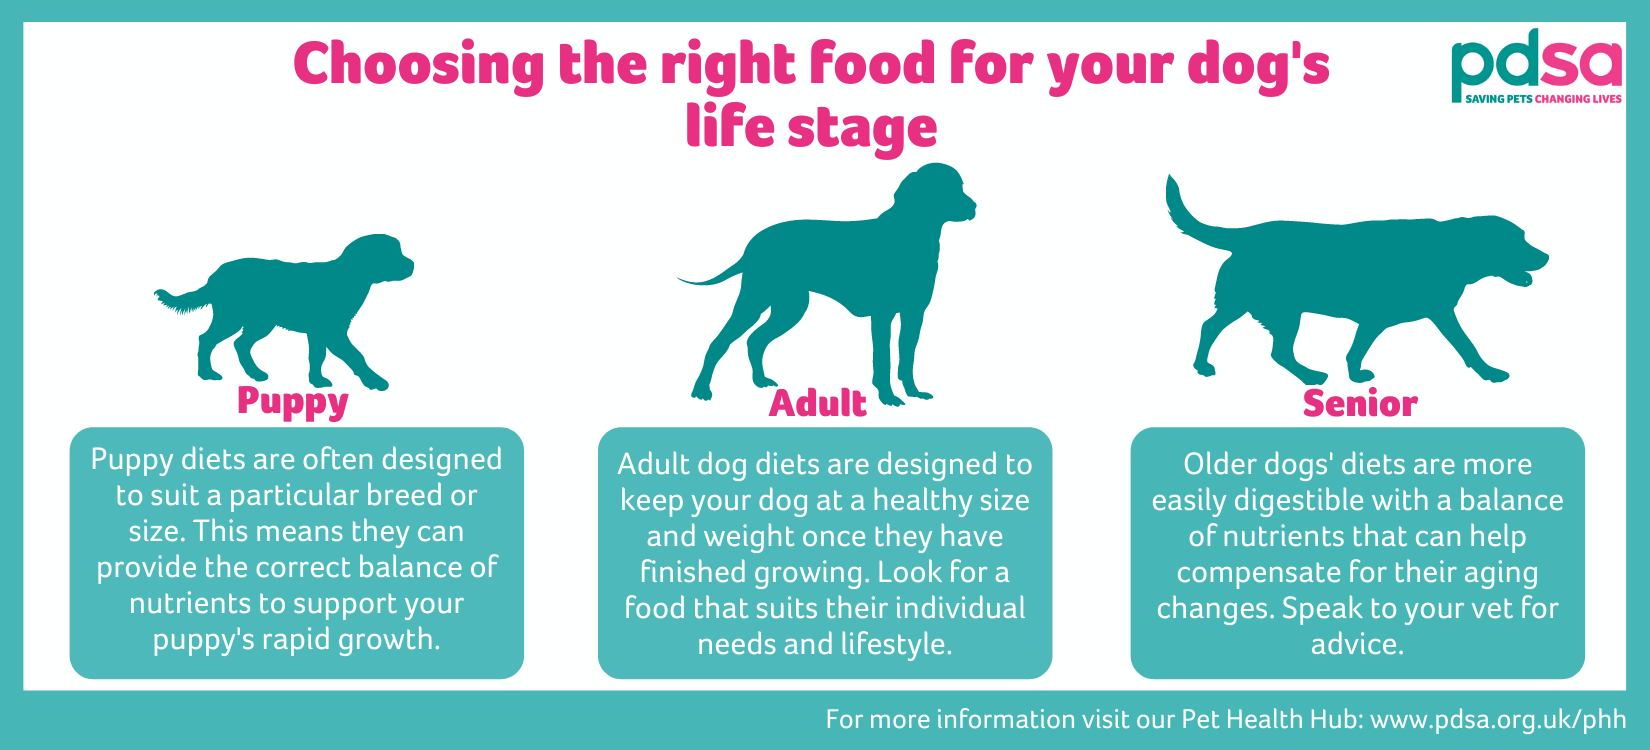 https://www.pdsa.org.uk/media/12026/pdsa-choosing-the-right-diet-for-your-dogs-life-stage-infographicpng.png